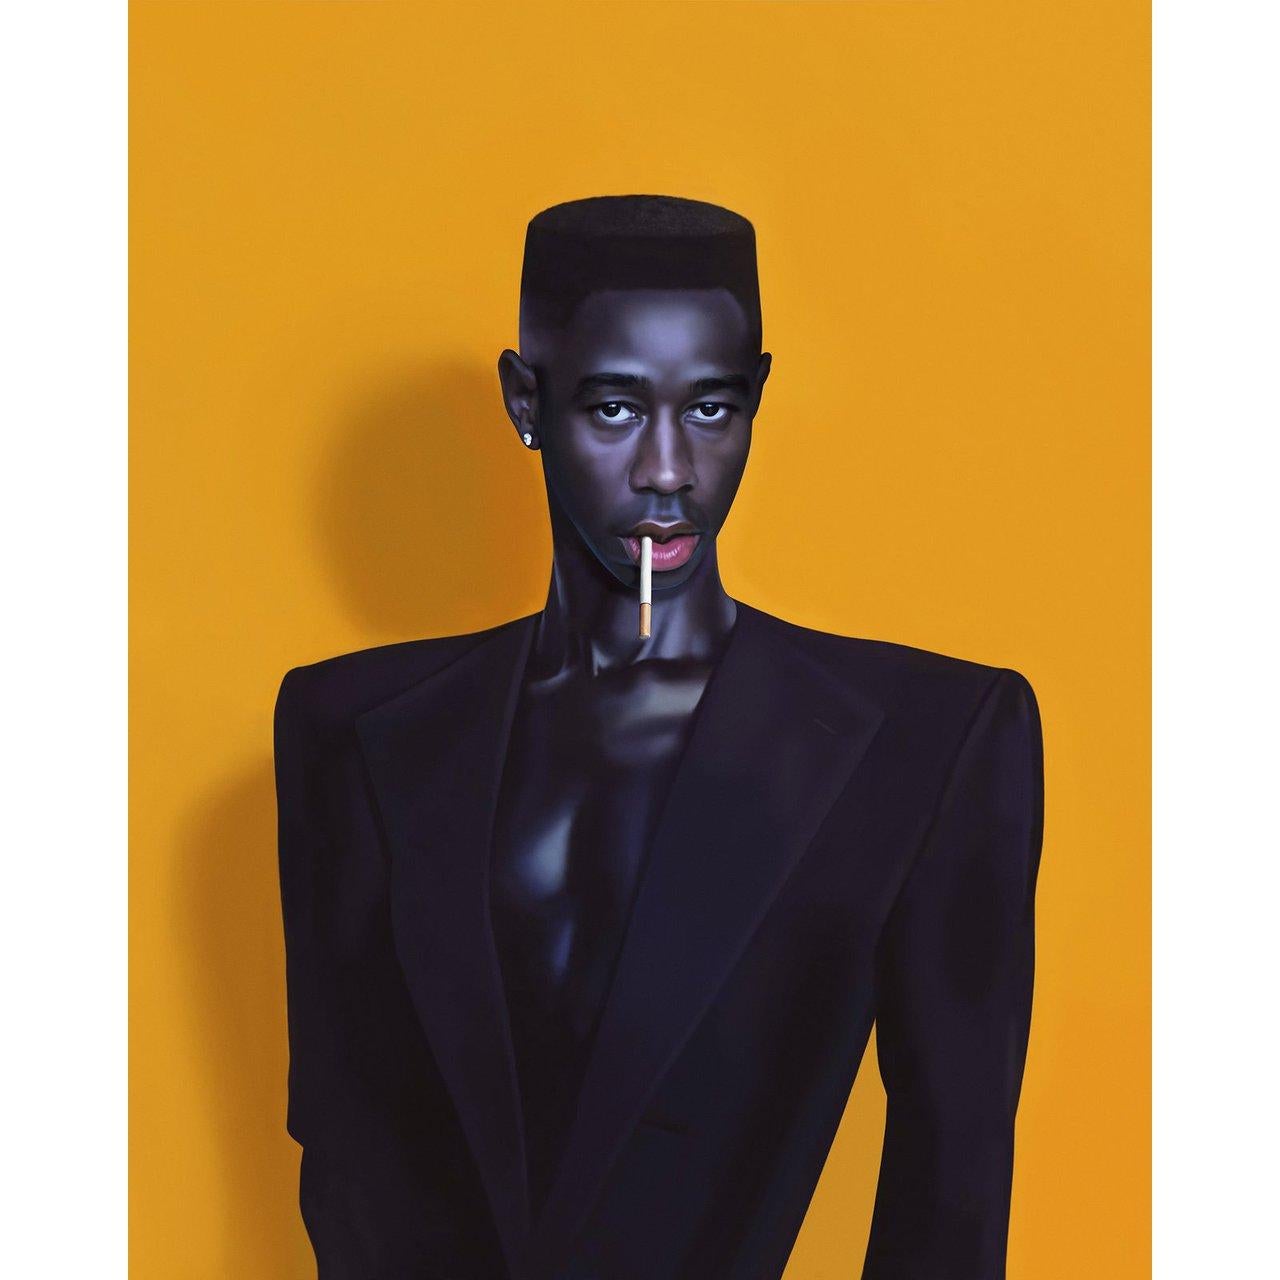 Original 2021 U.S. mini poster by Akiko Stehrenberger for Tyler the Creator / Grace Jones (2021). Signed by Akiko Stehrenberger. Fine condition, rolled. Please note: the size is stated in inches and the actual size can vary by an inch or more.